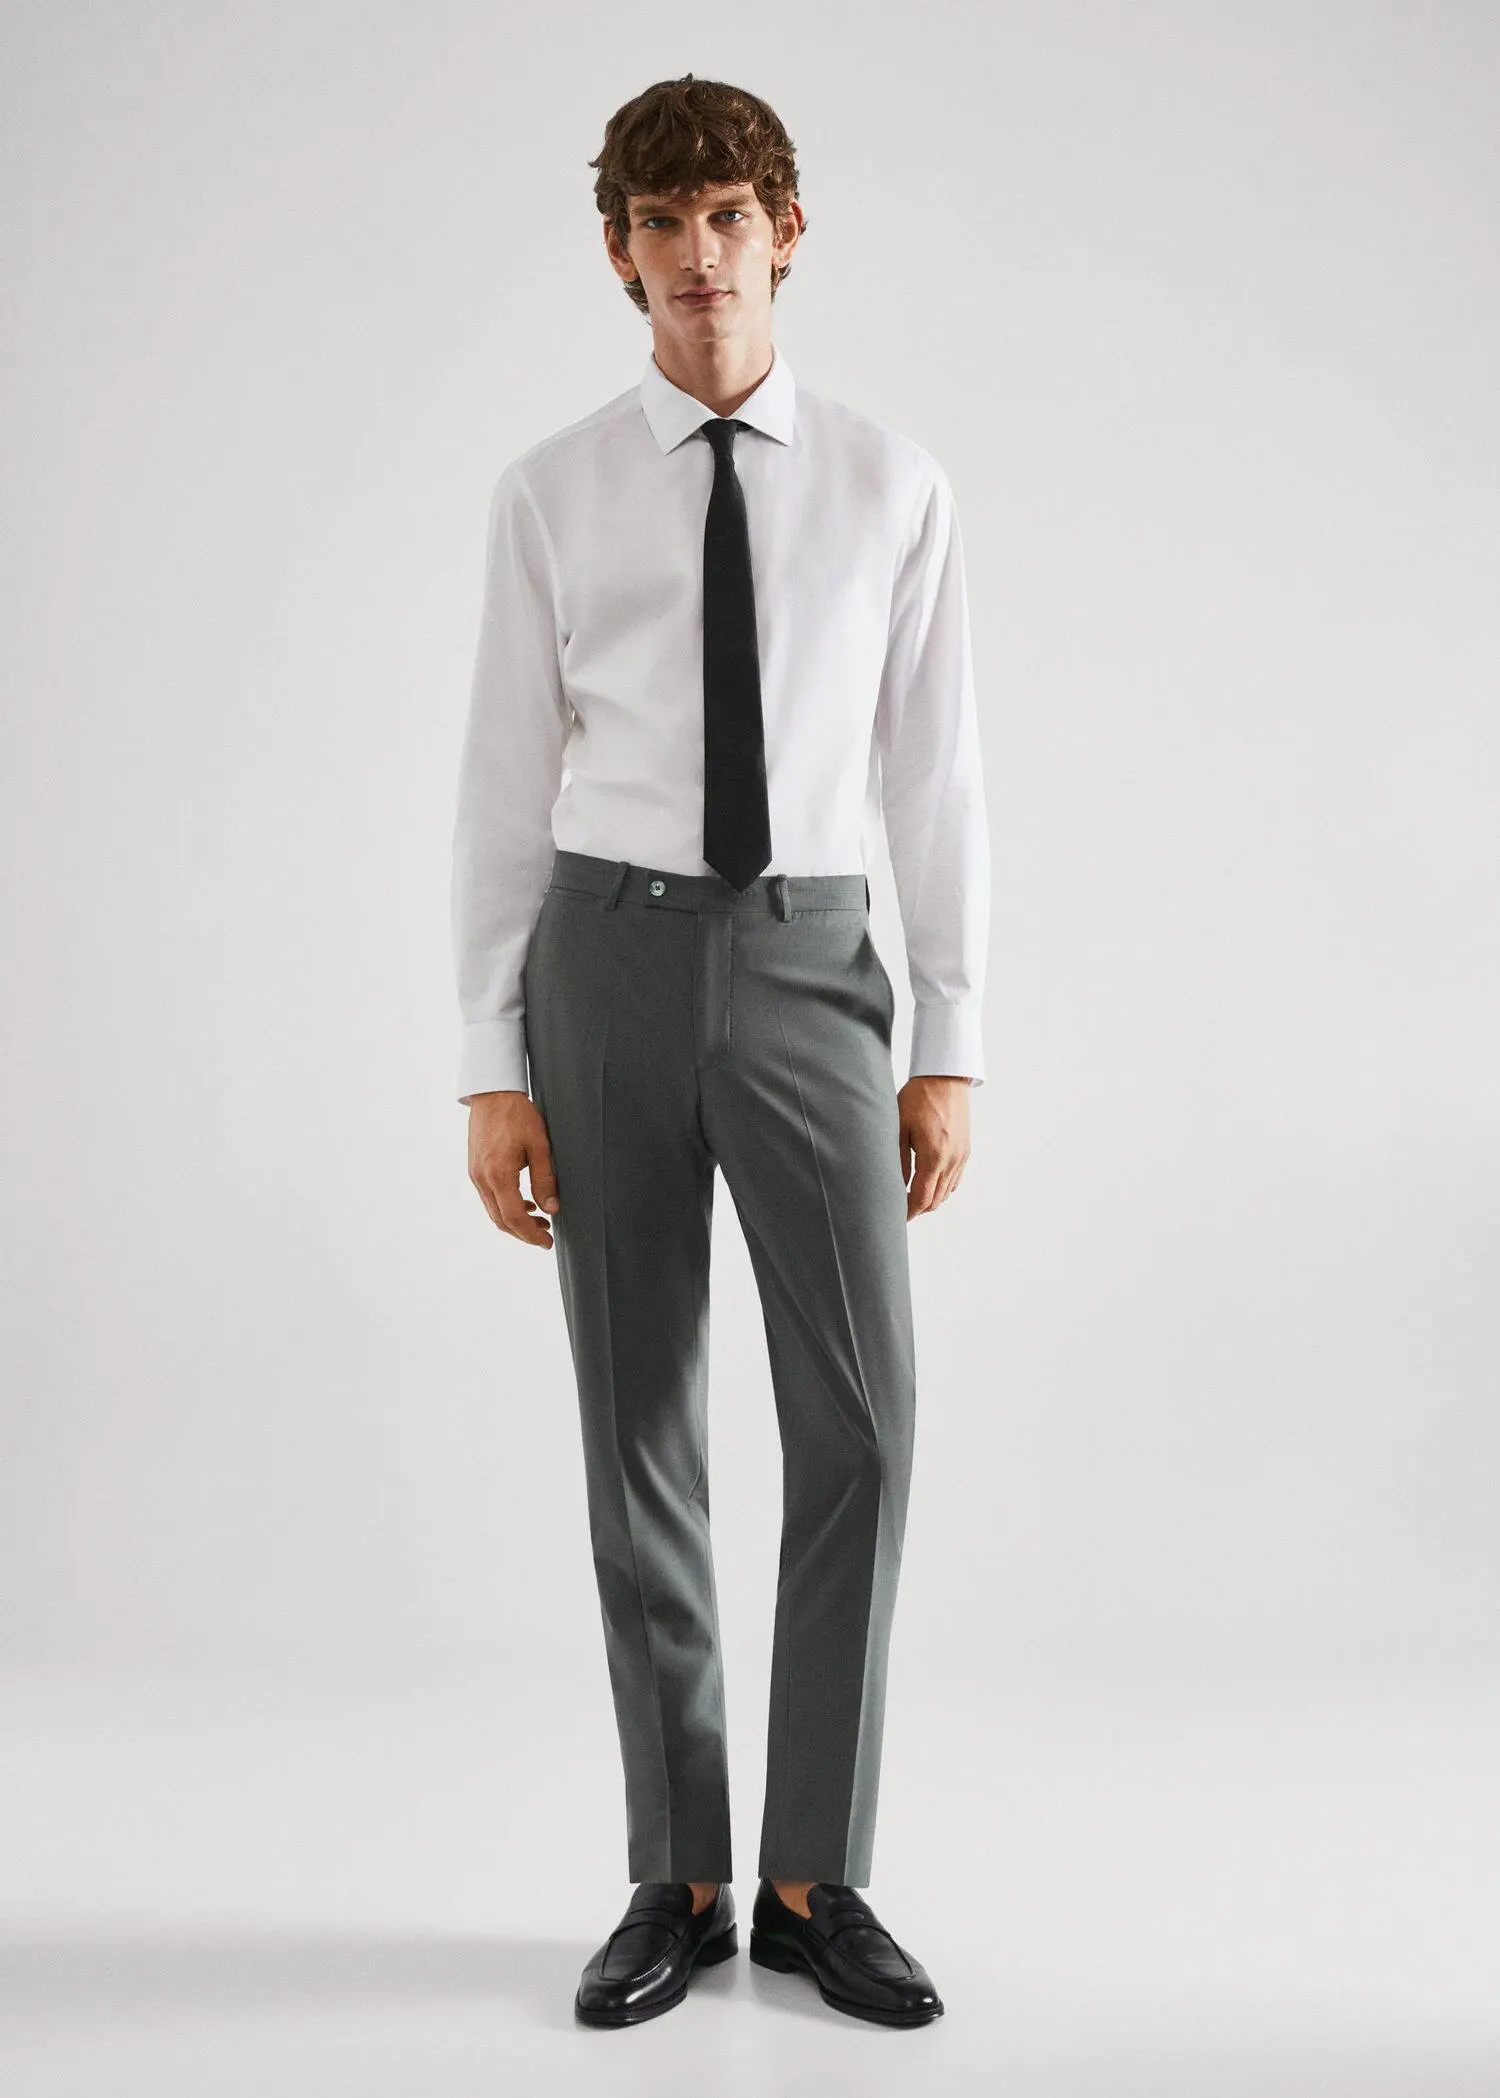 Mango Wool slim-fit suit trousers. a man in a white dress shirt and black tie. 